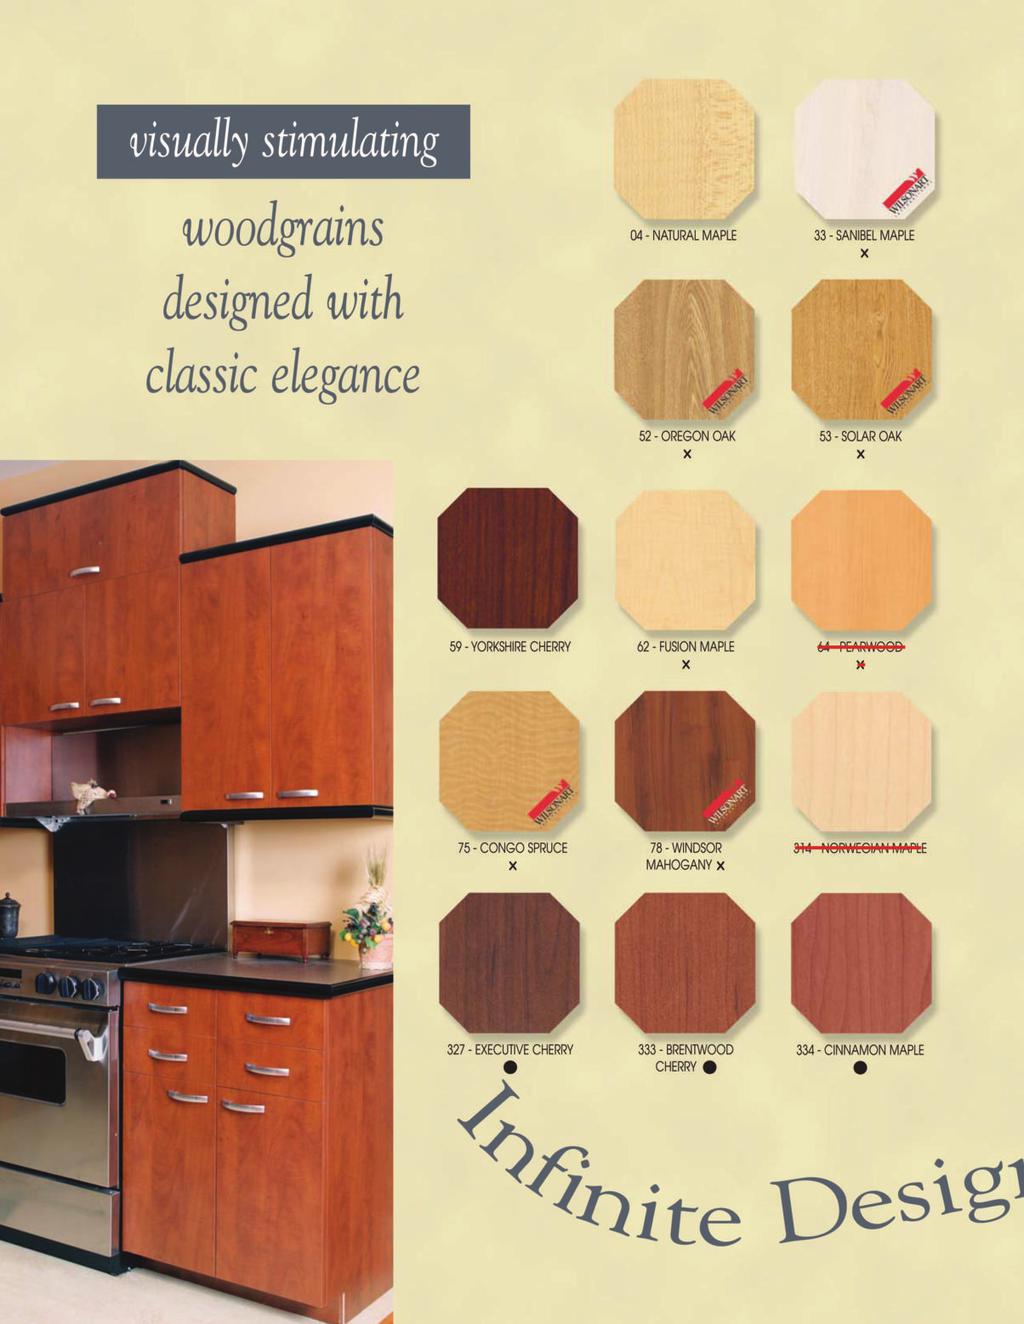 GENERAL INFORMATION Roseburg Melamine decorative panels consist of melamine resin saturated decorative papers, thermally fused under heat and pressure to a substrate of Roseburg UltraBlend